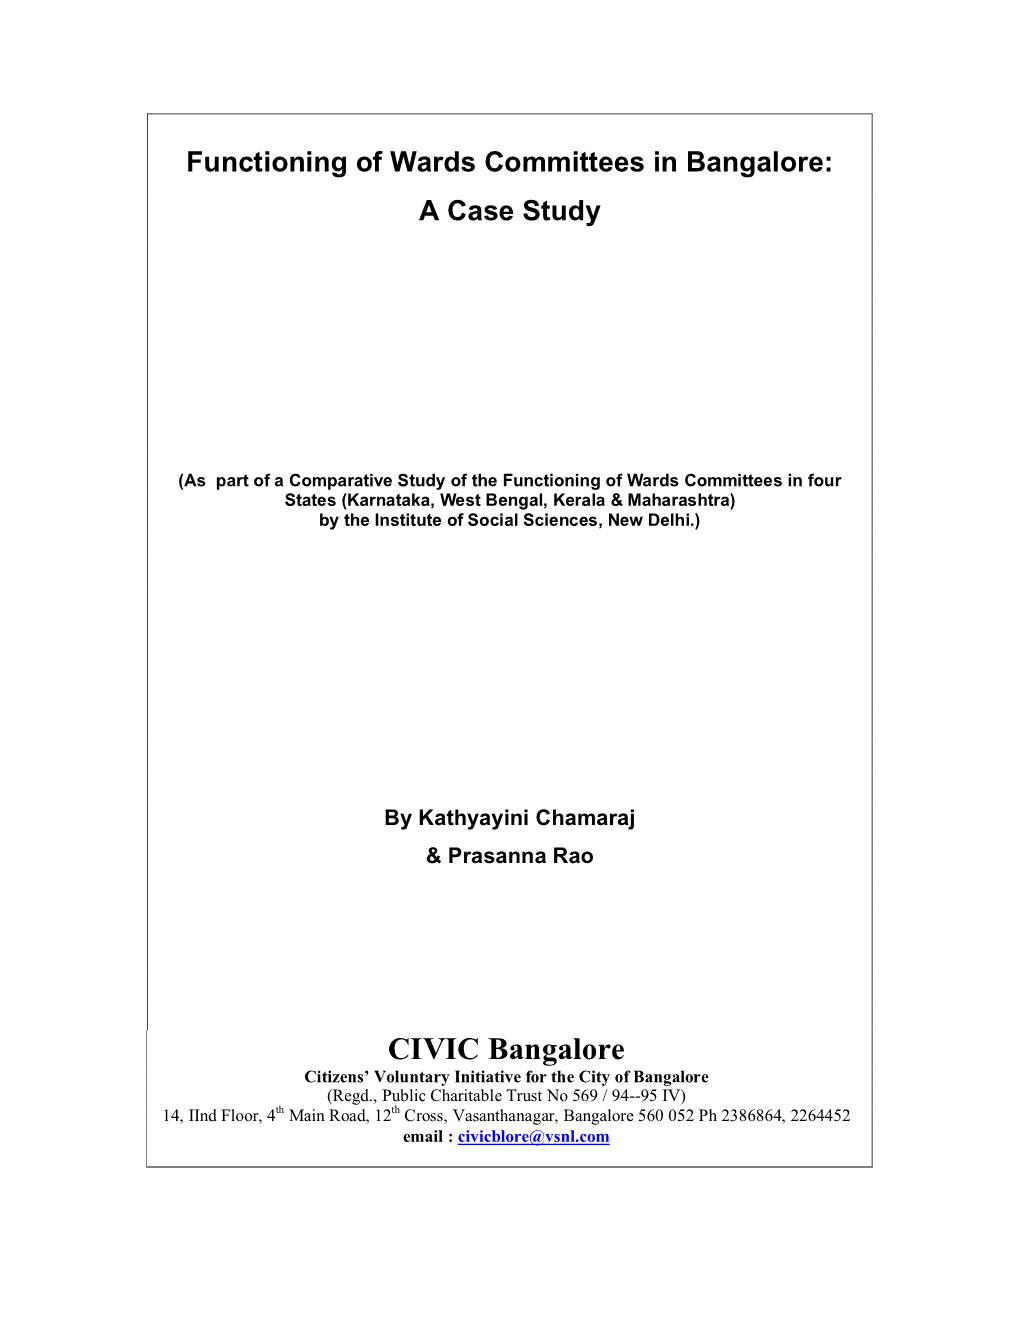 Functioning of Wards Committees in Bangalore: a Case Study